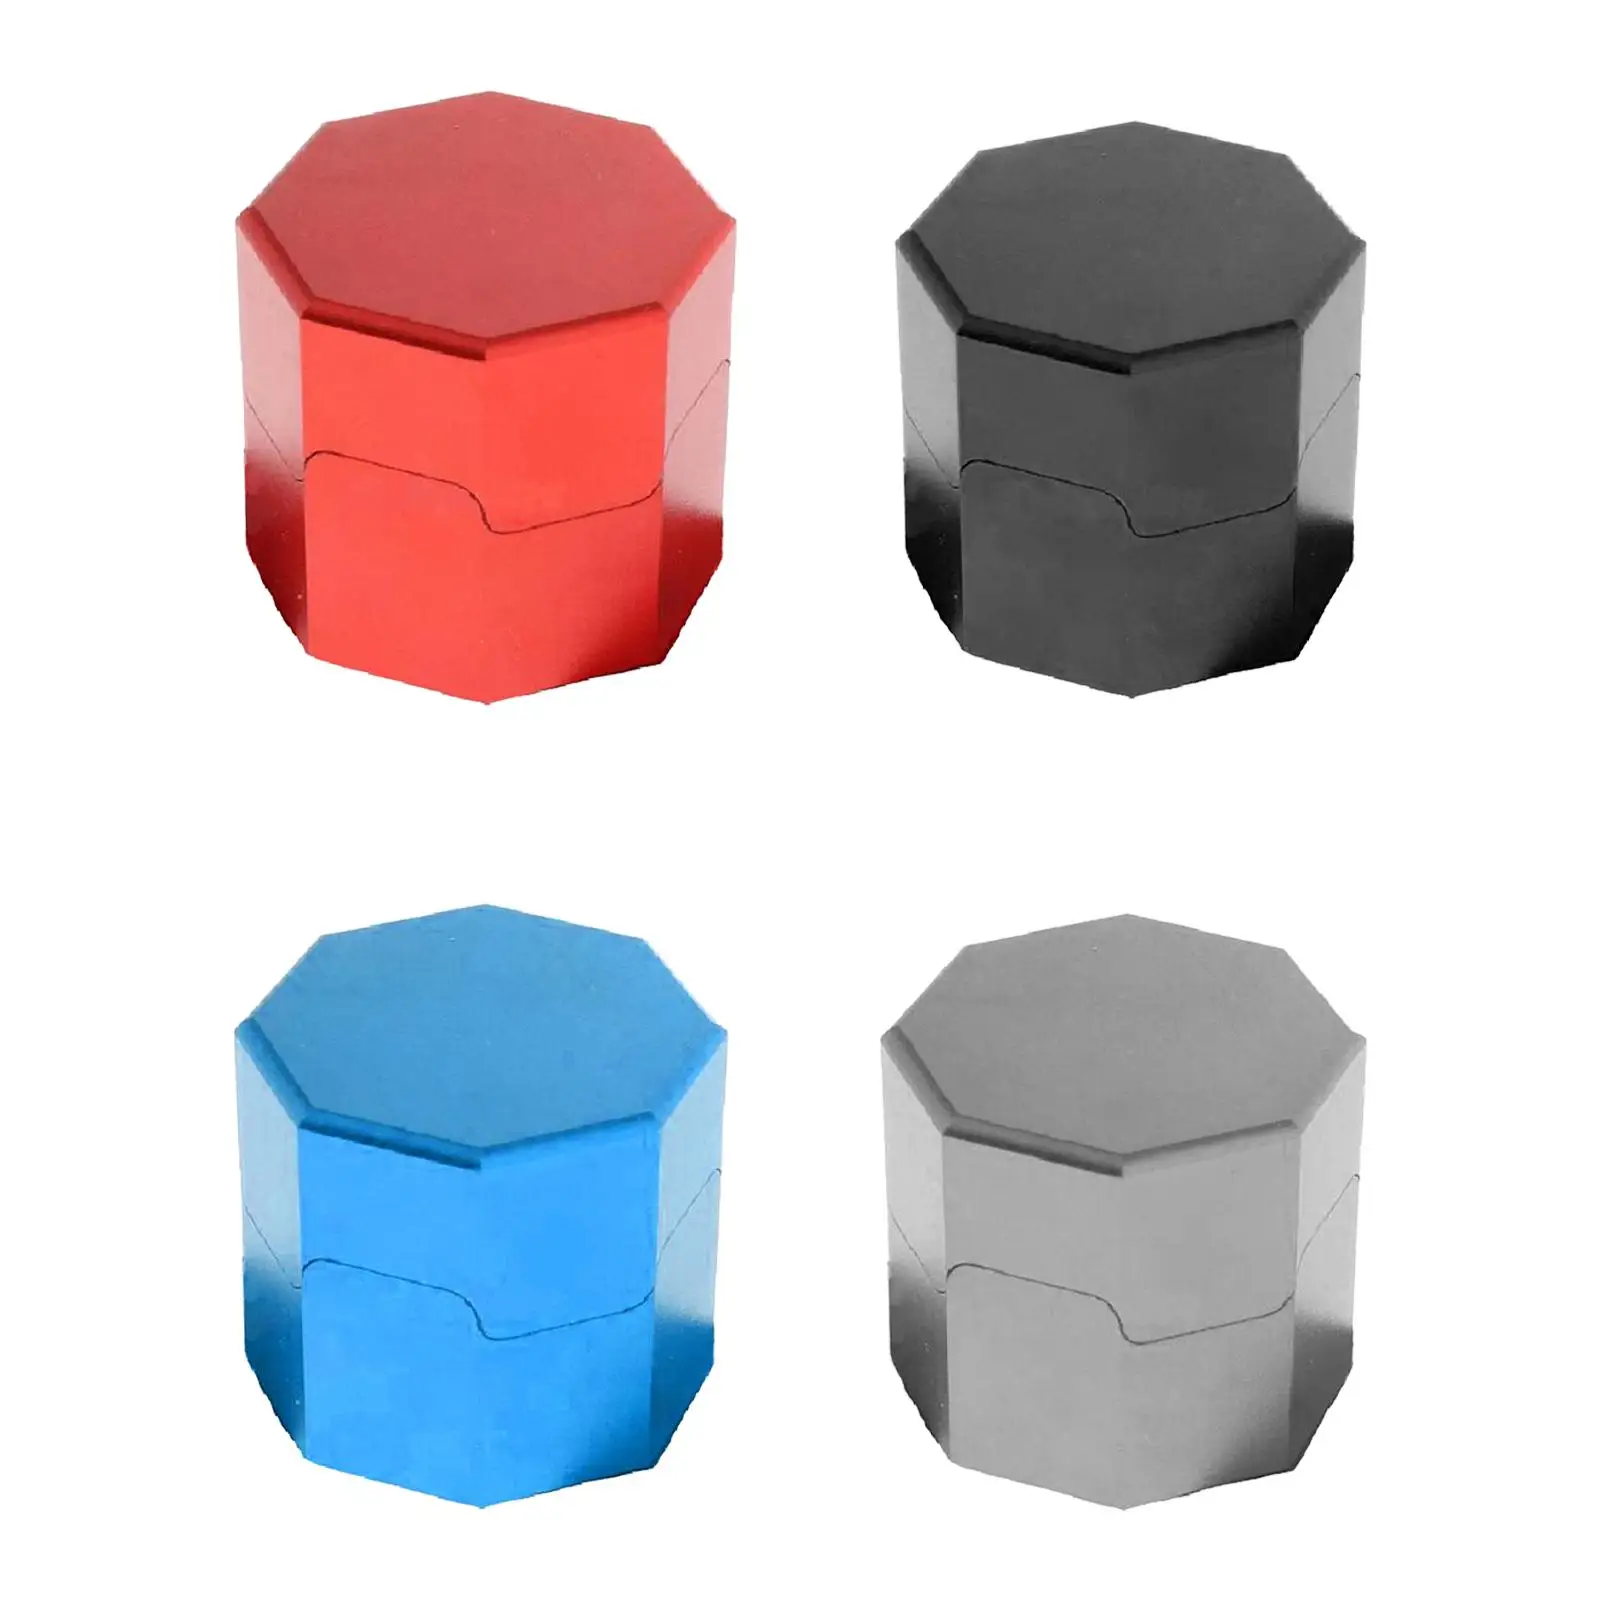 Octagonal Chalk Holder Pool Snooker Chalk Carrier Case Storage Case Pool Table Accessories Cup Portable Billiard Cue Tip Chalk